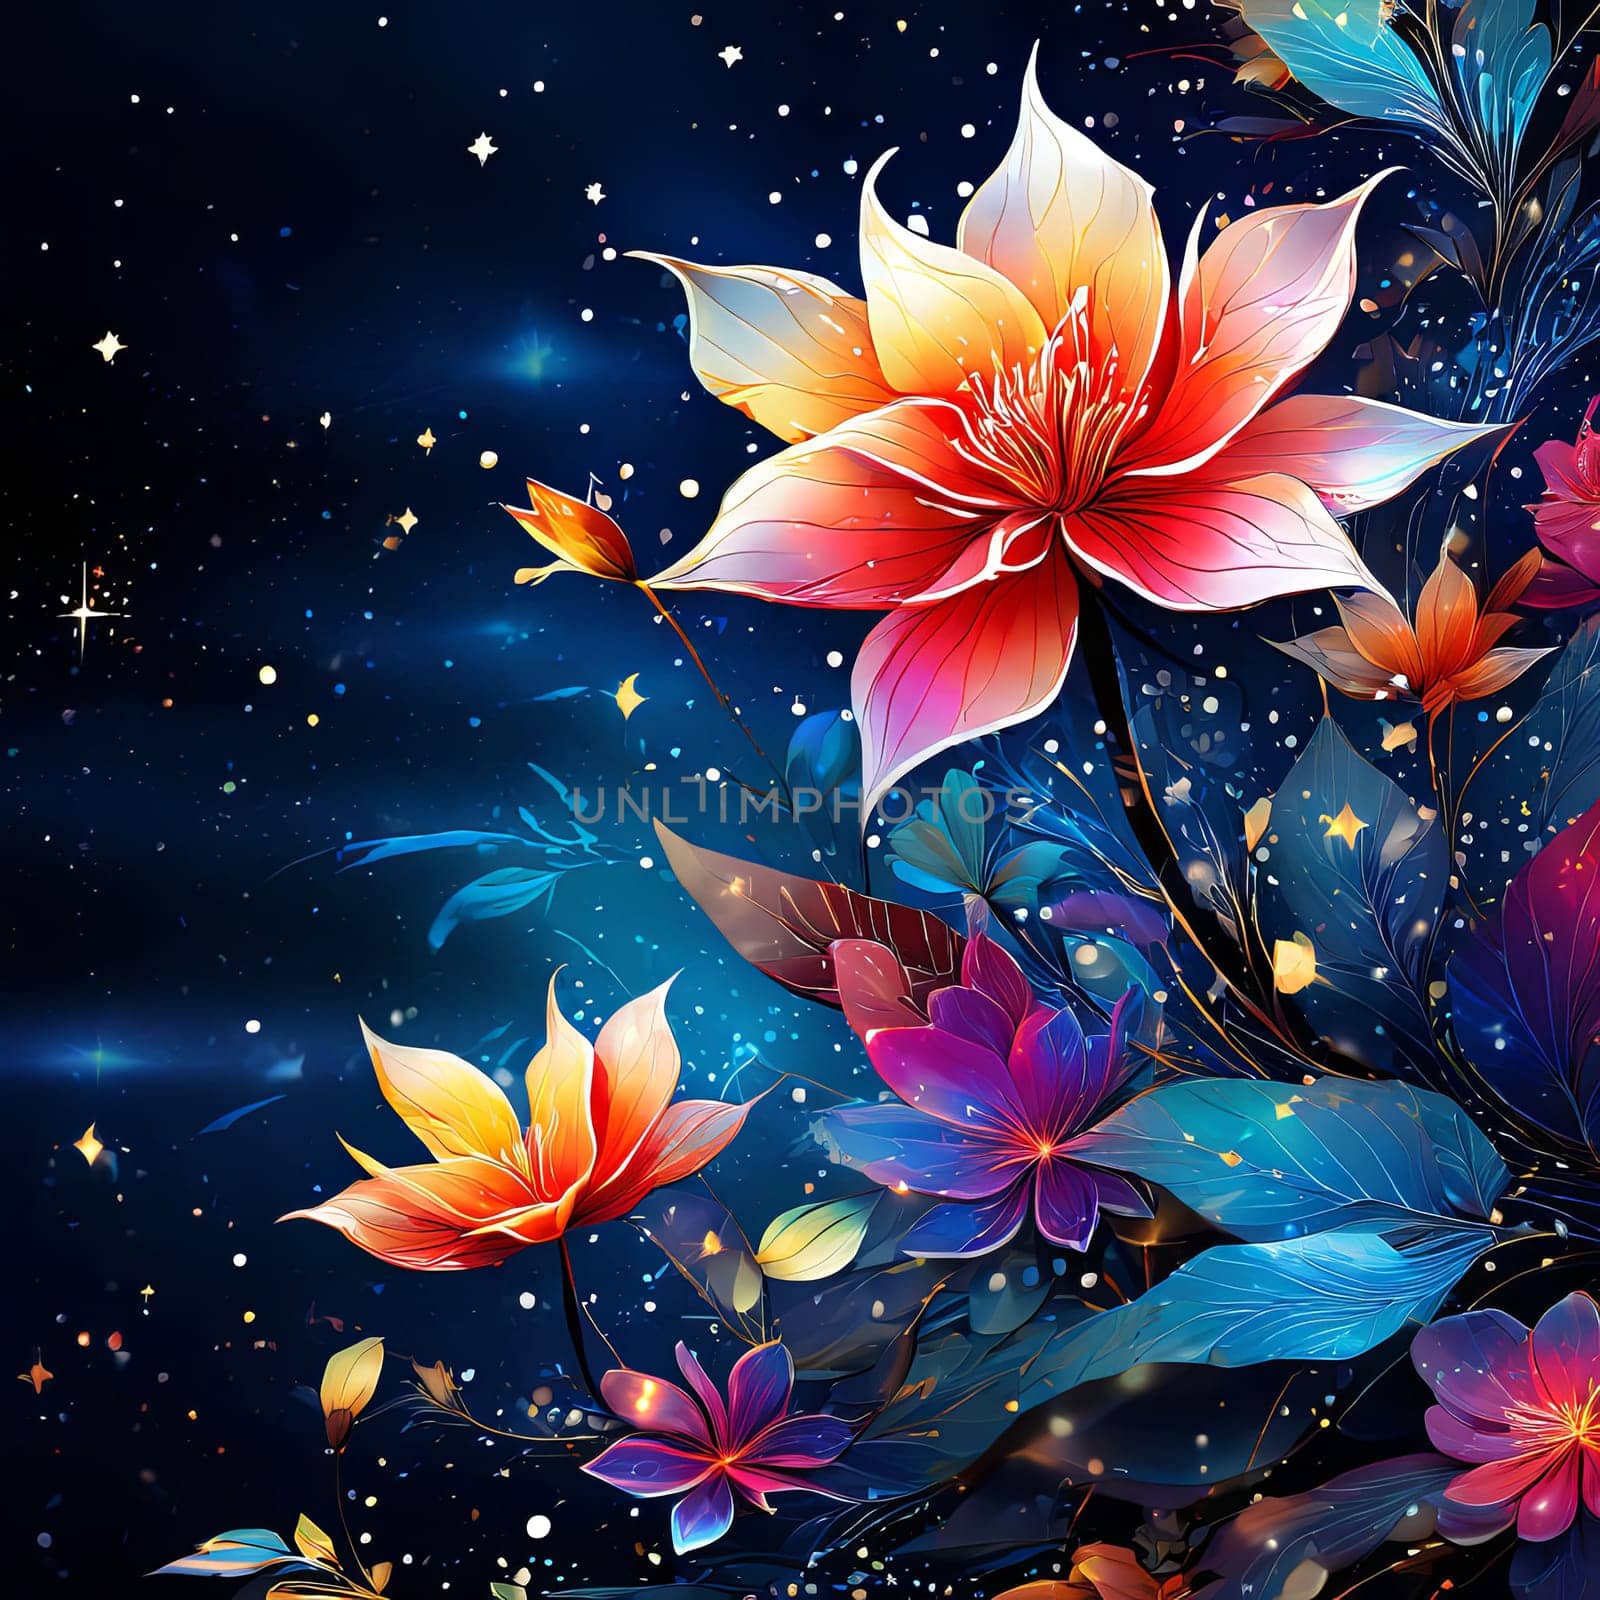 Lotus flowers floating in starry sky. Creating peaceful, enchanting scene that symbolizes purity. For interior design, decoration, art, advertising, web design, as illustration for book, magazine